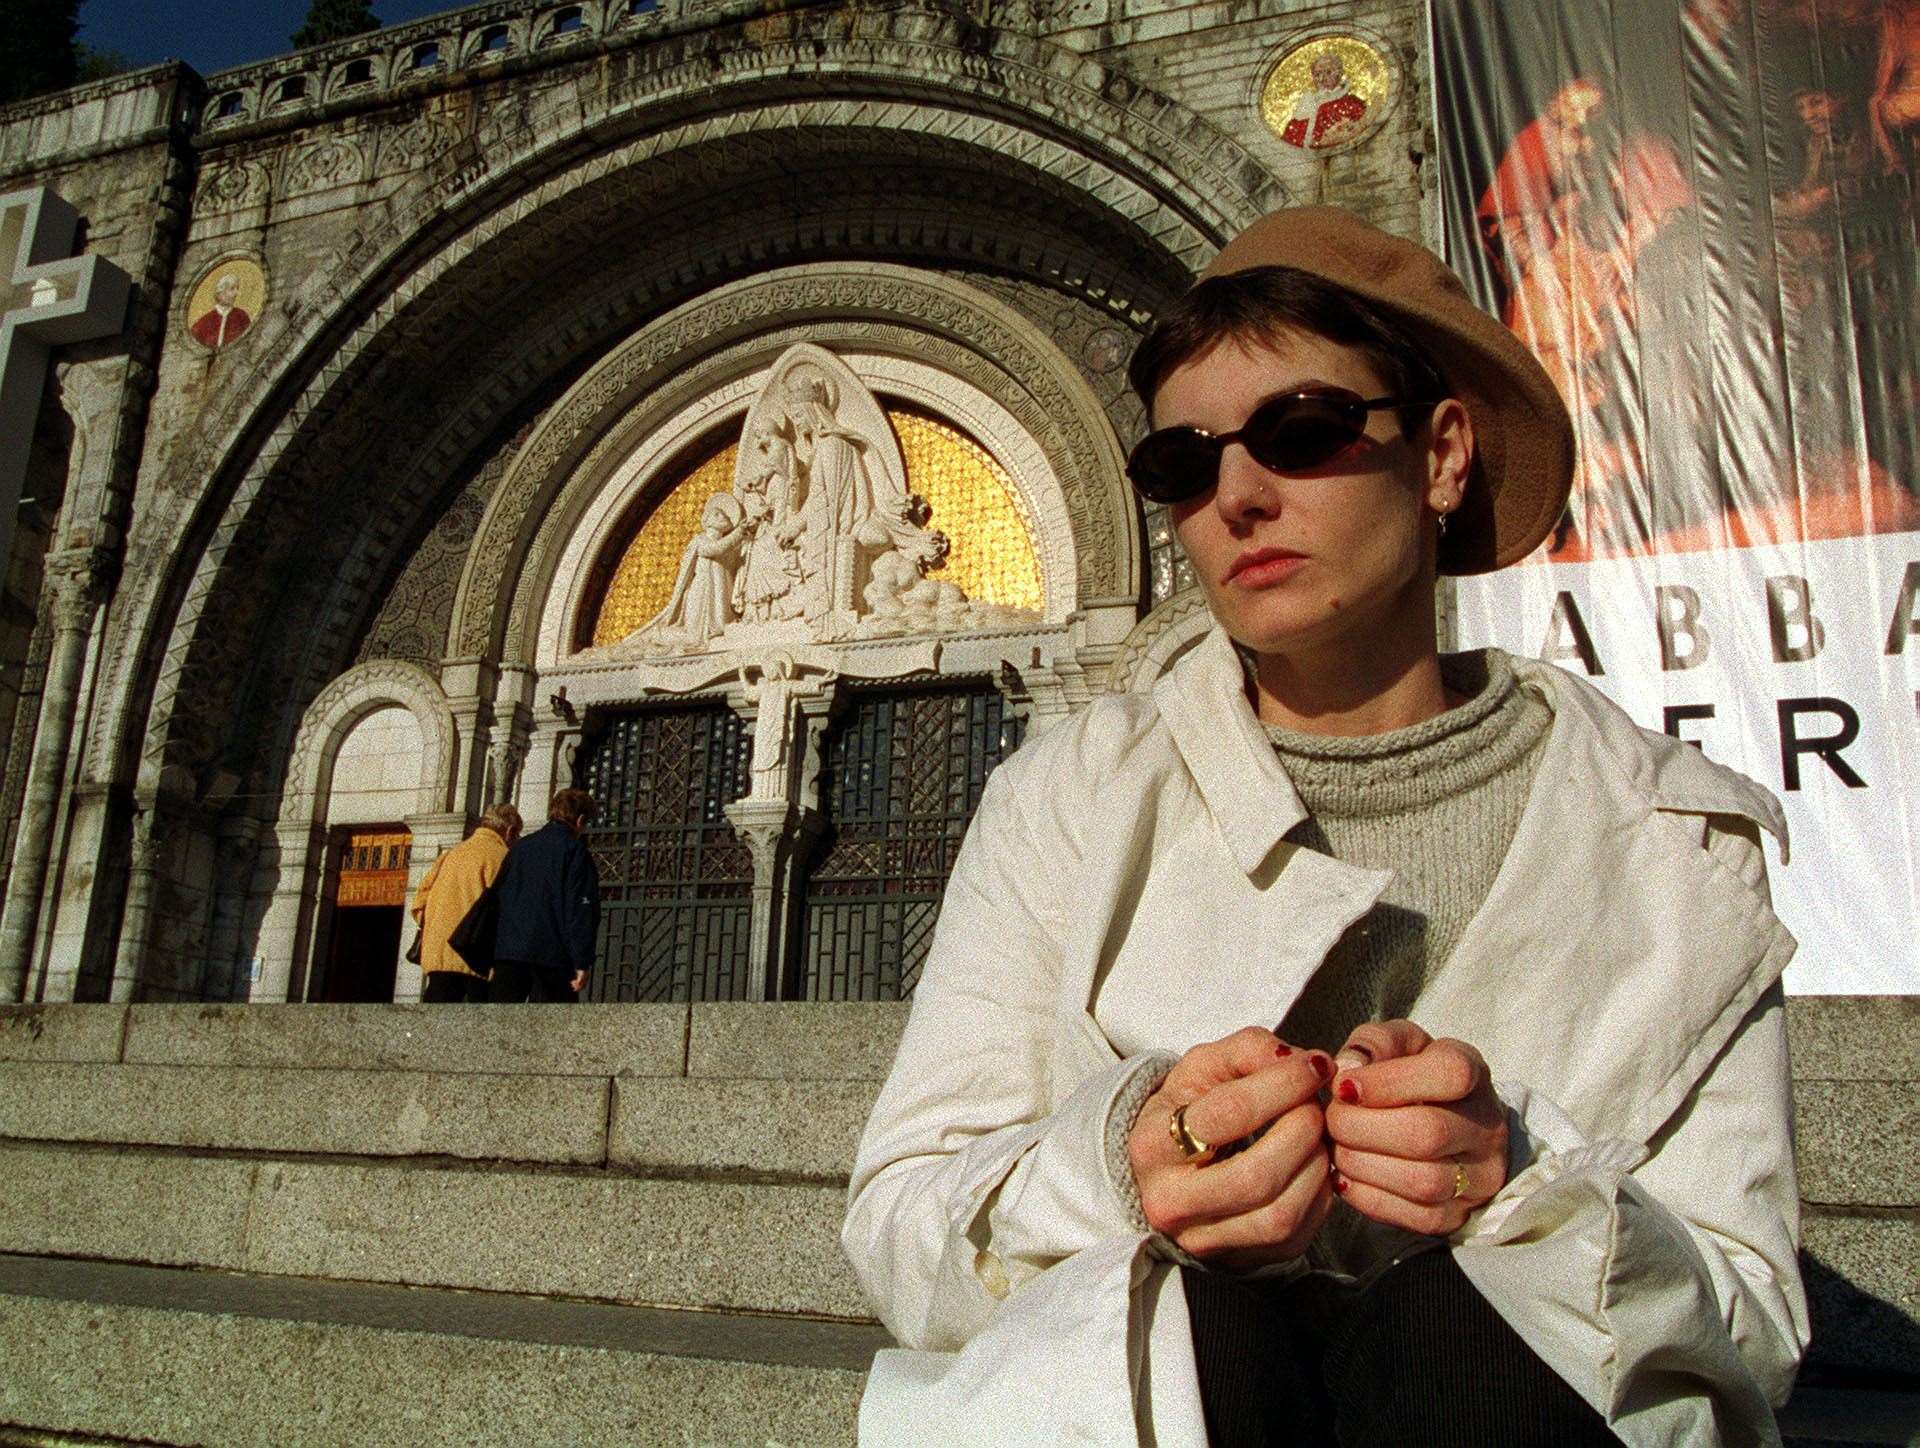 Sinead O’Connor at Lourdes where she was ordained as a Priest in 1999 (Michael Crabtree/PA)